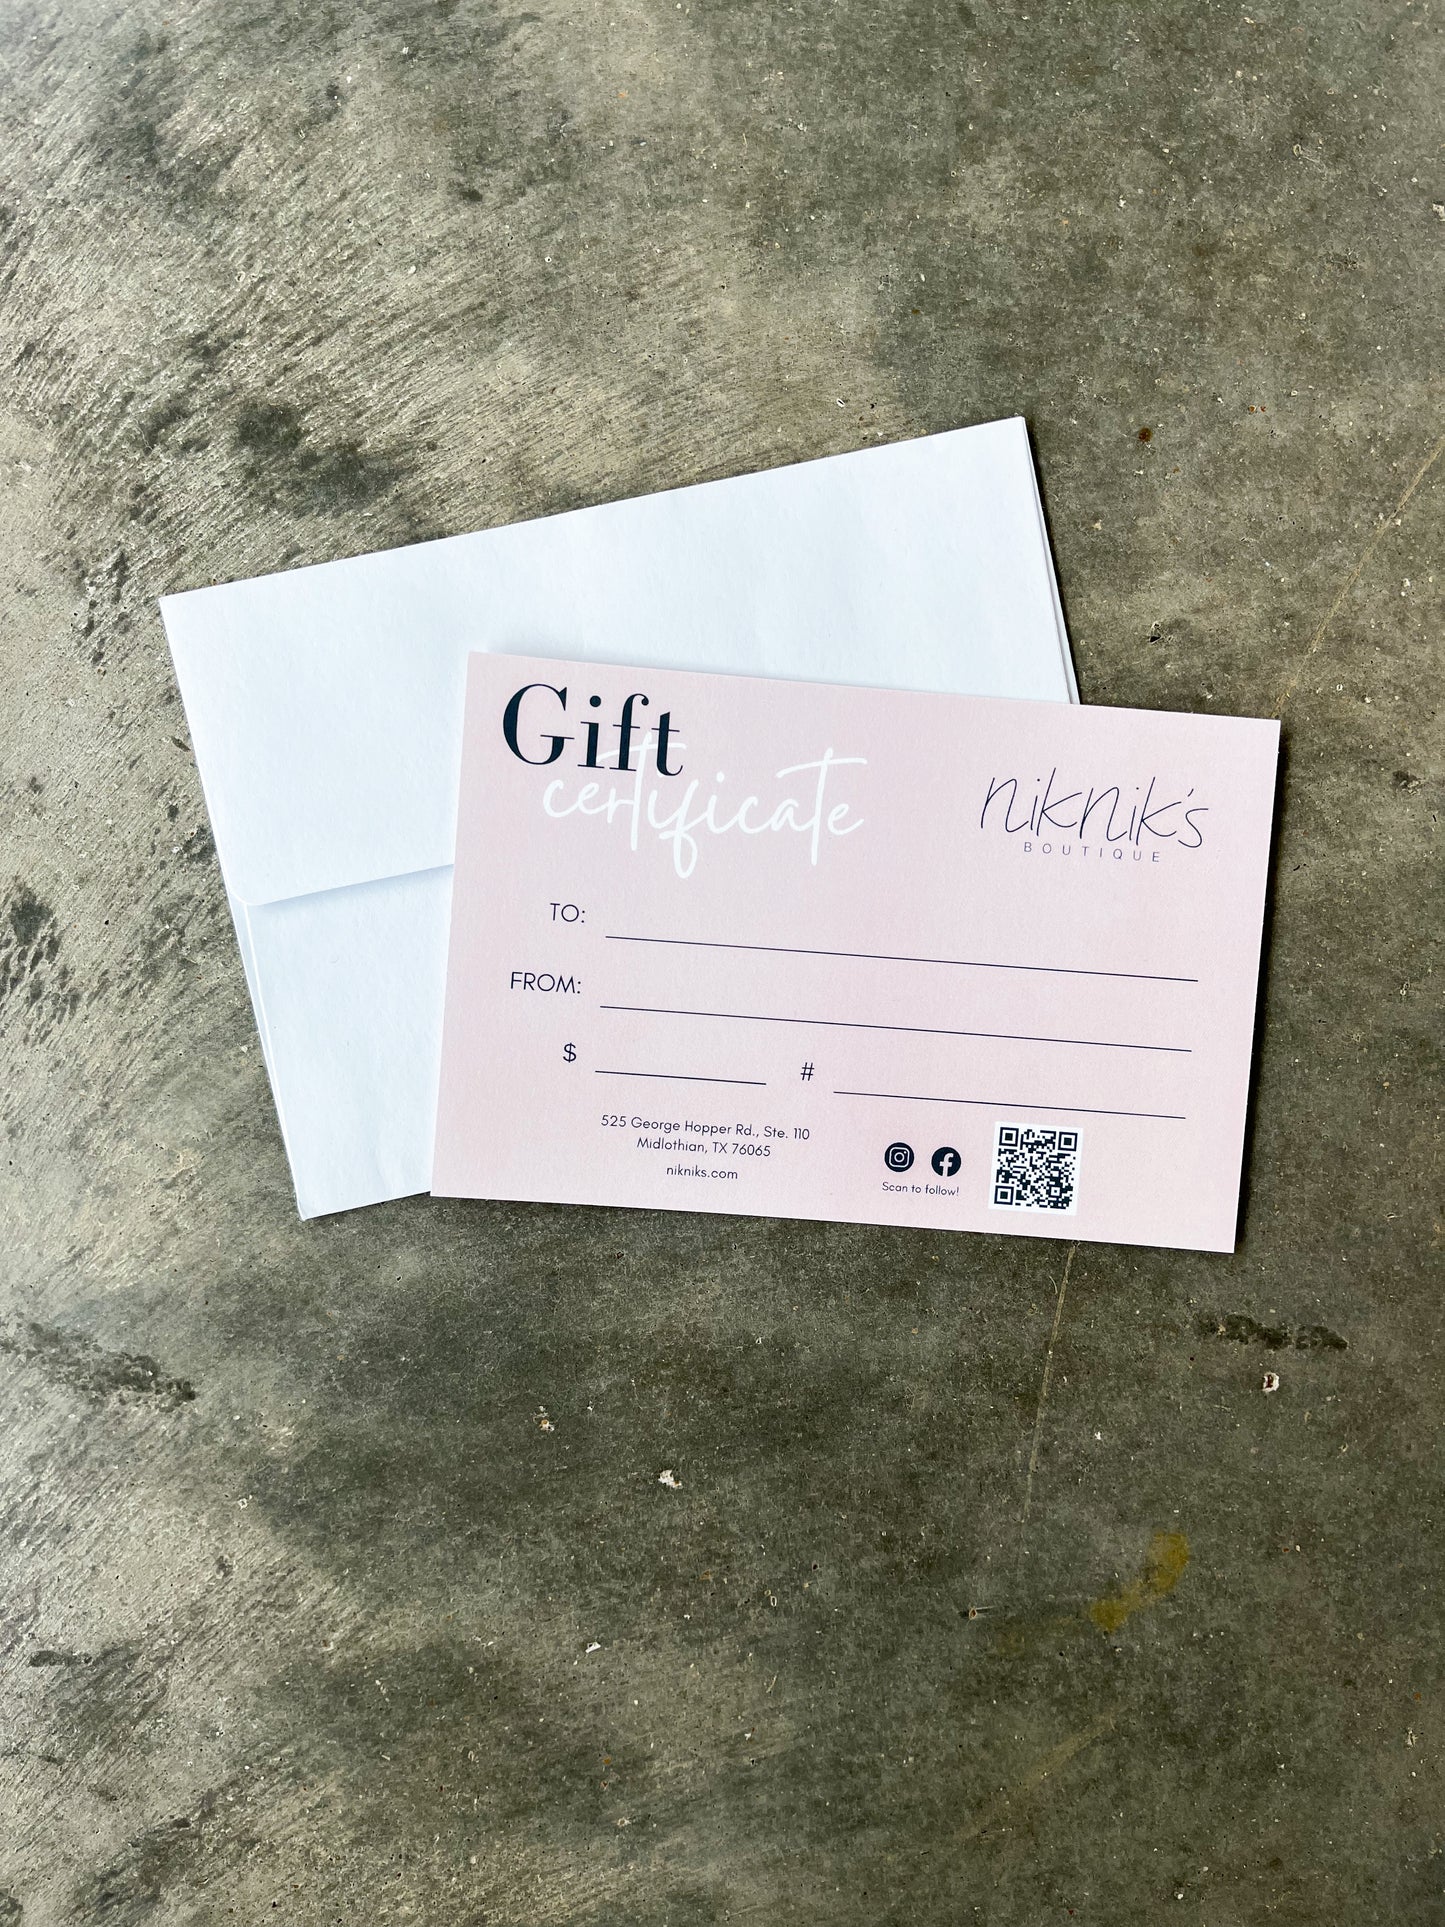 NikNik's Boutique Gift Card